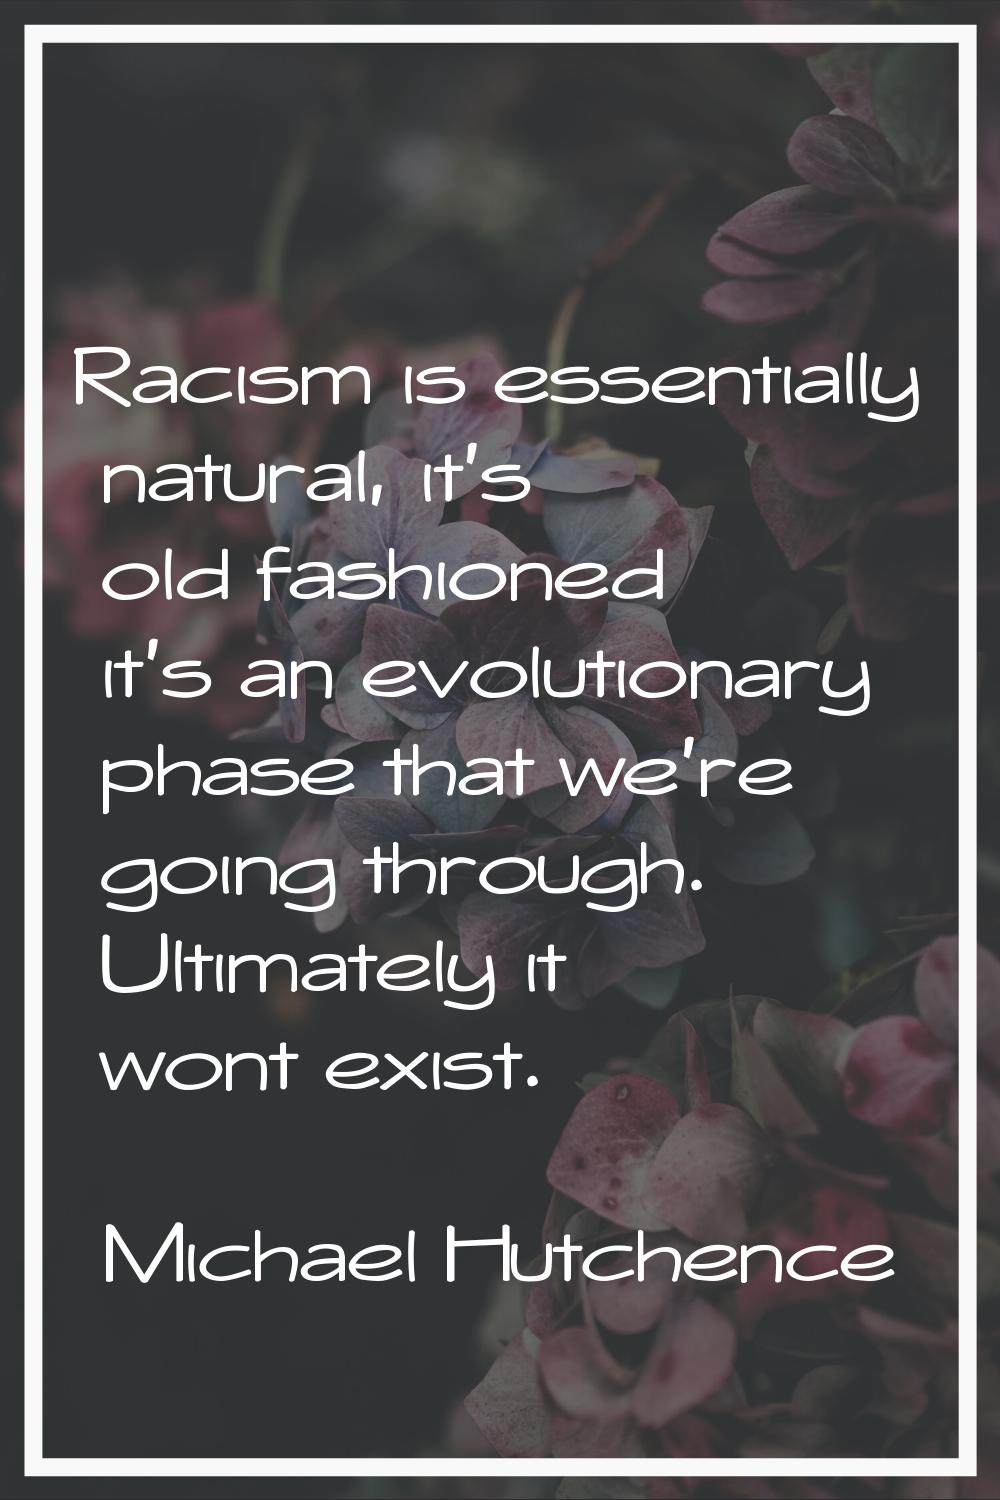 Racism is essentially natural, it's old fashioned it's an evolutionary phase that we're going throu